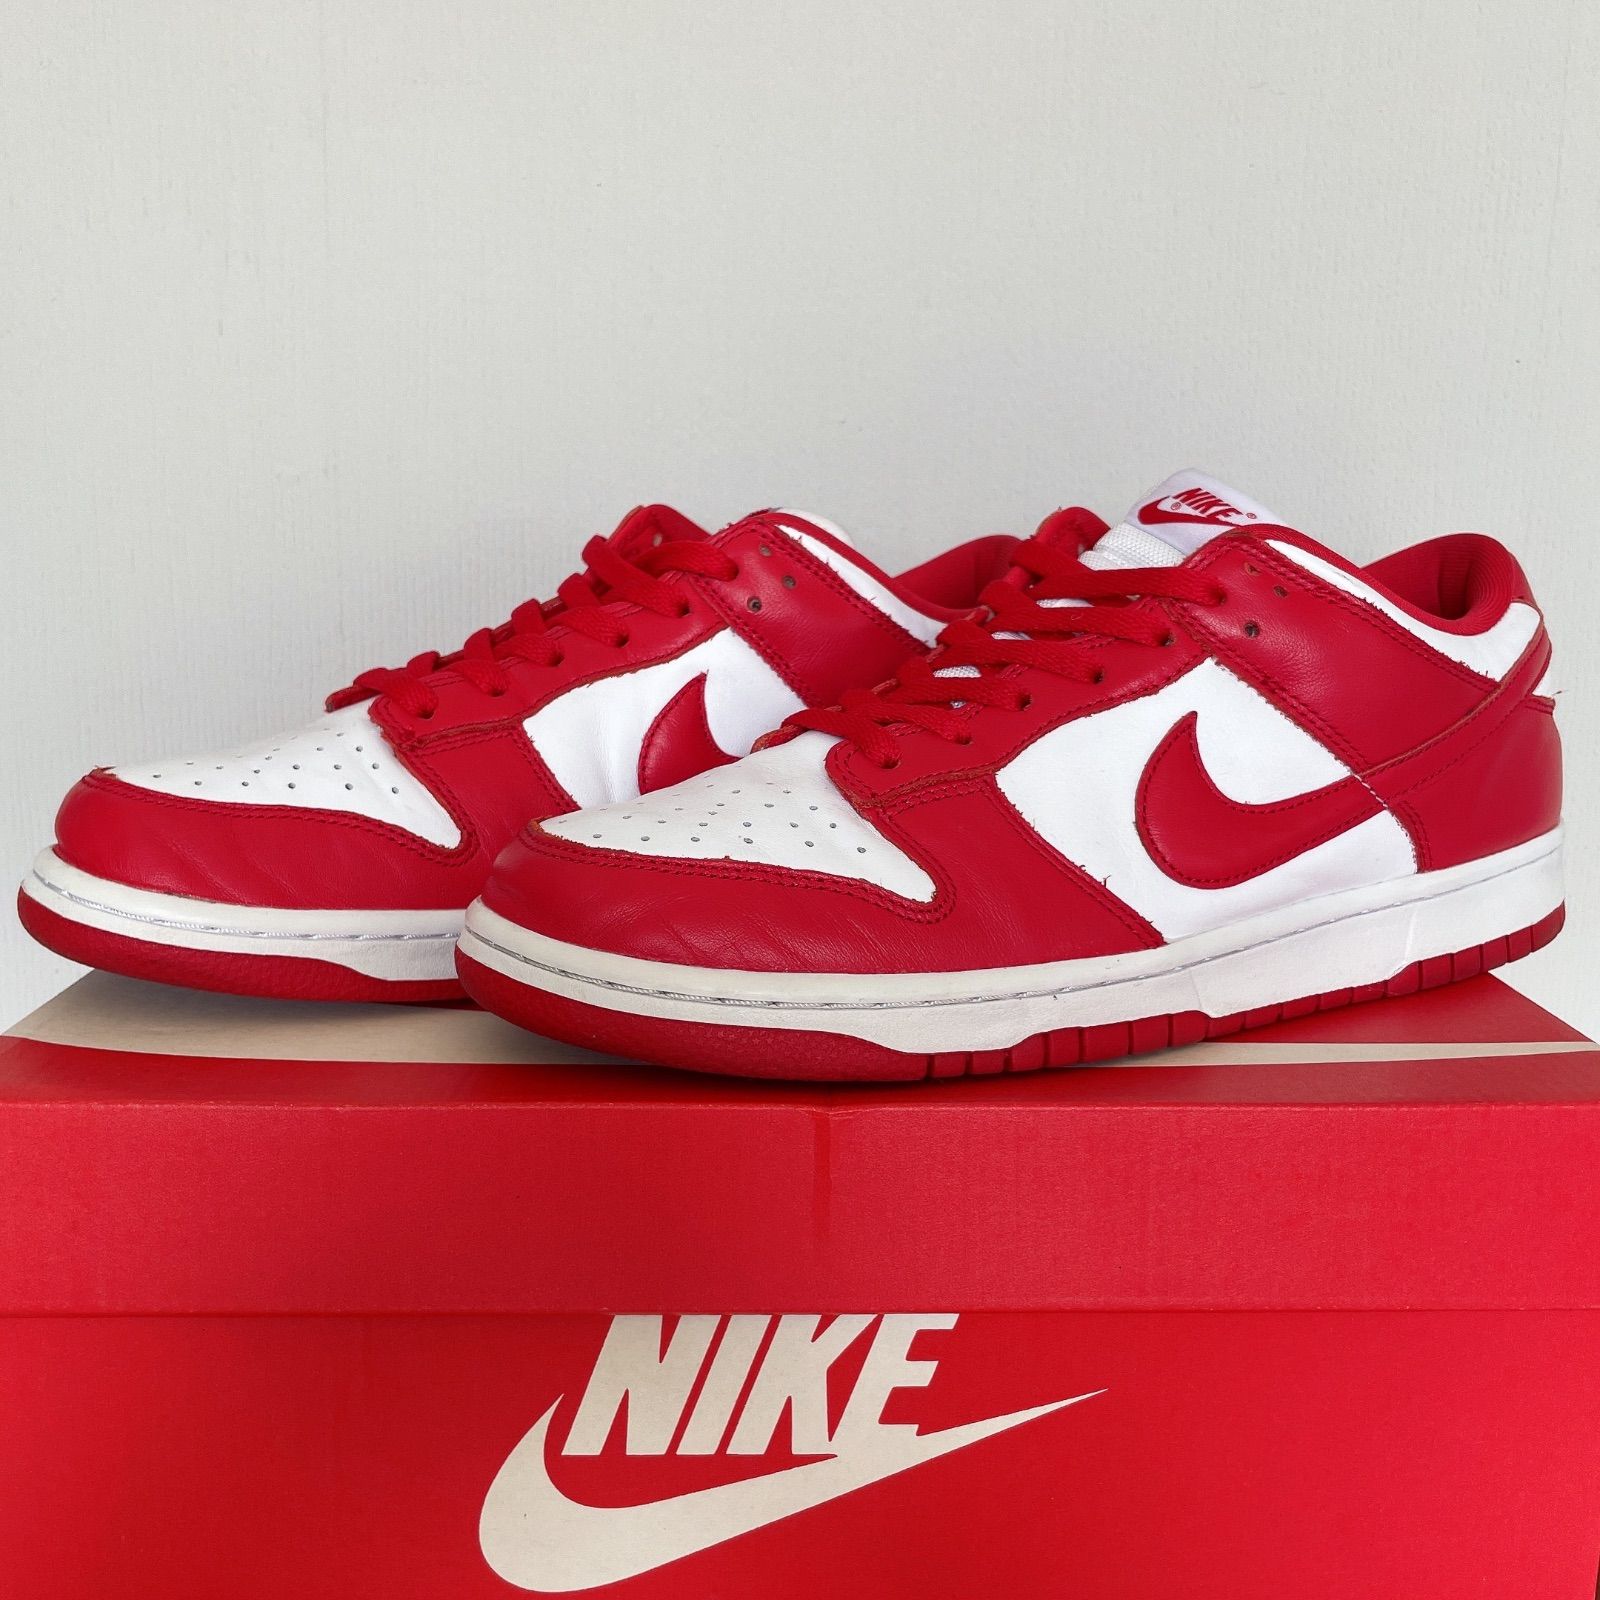 NIKE DUNK LOW SP WHITE / UNIVERSITY REDダンク